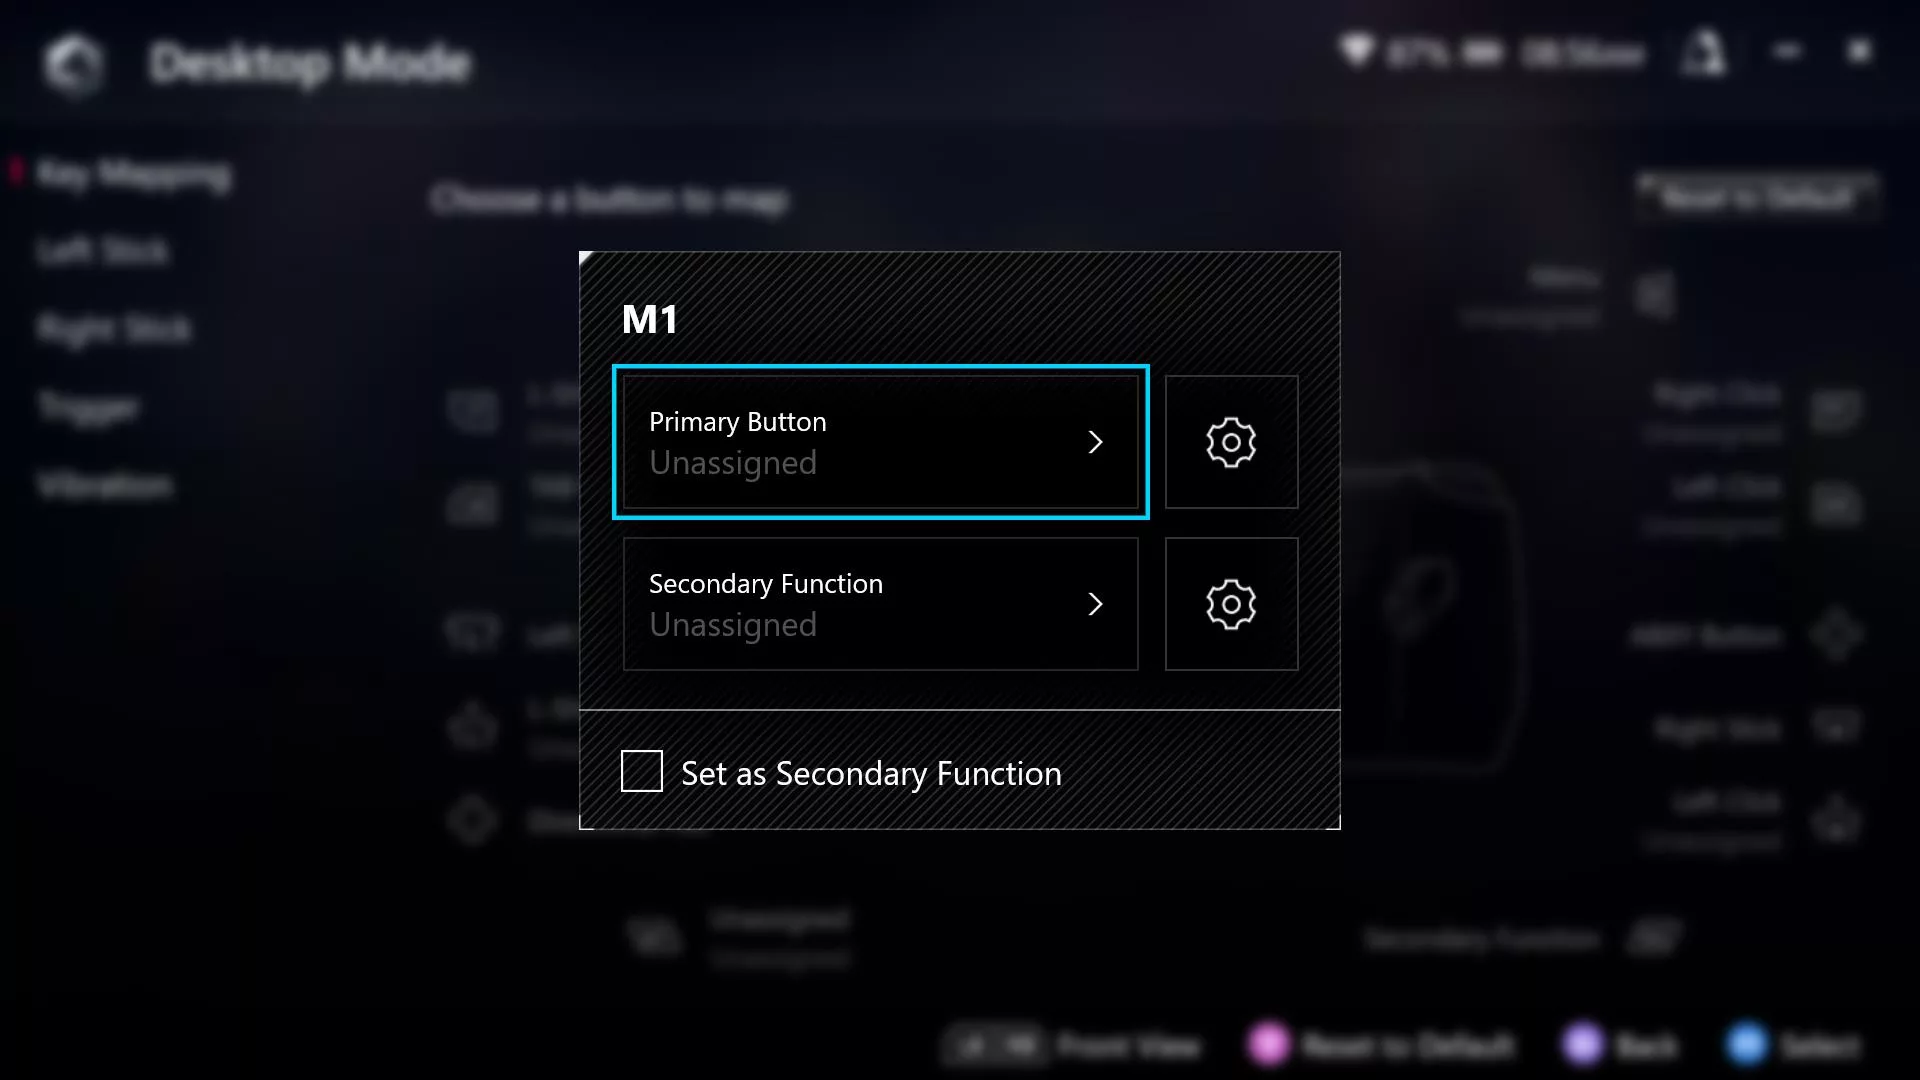 A screenshot of Armoury Crate's M1 button configuration.